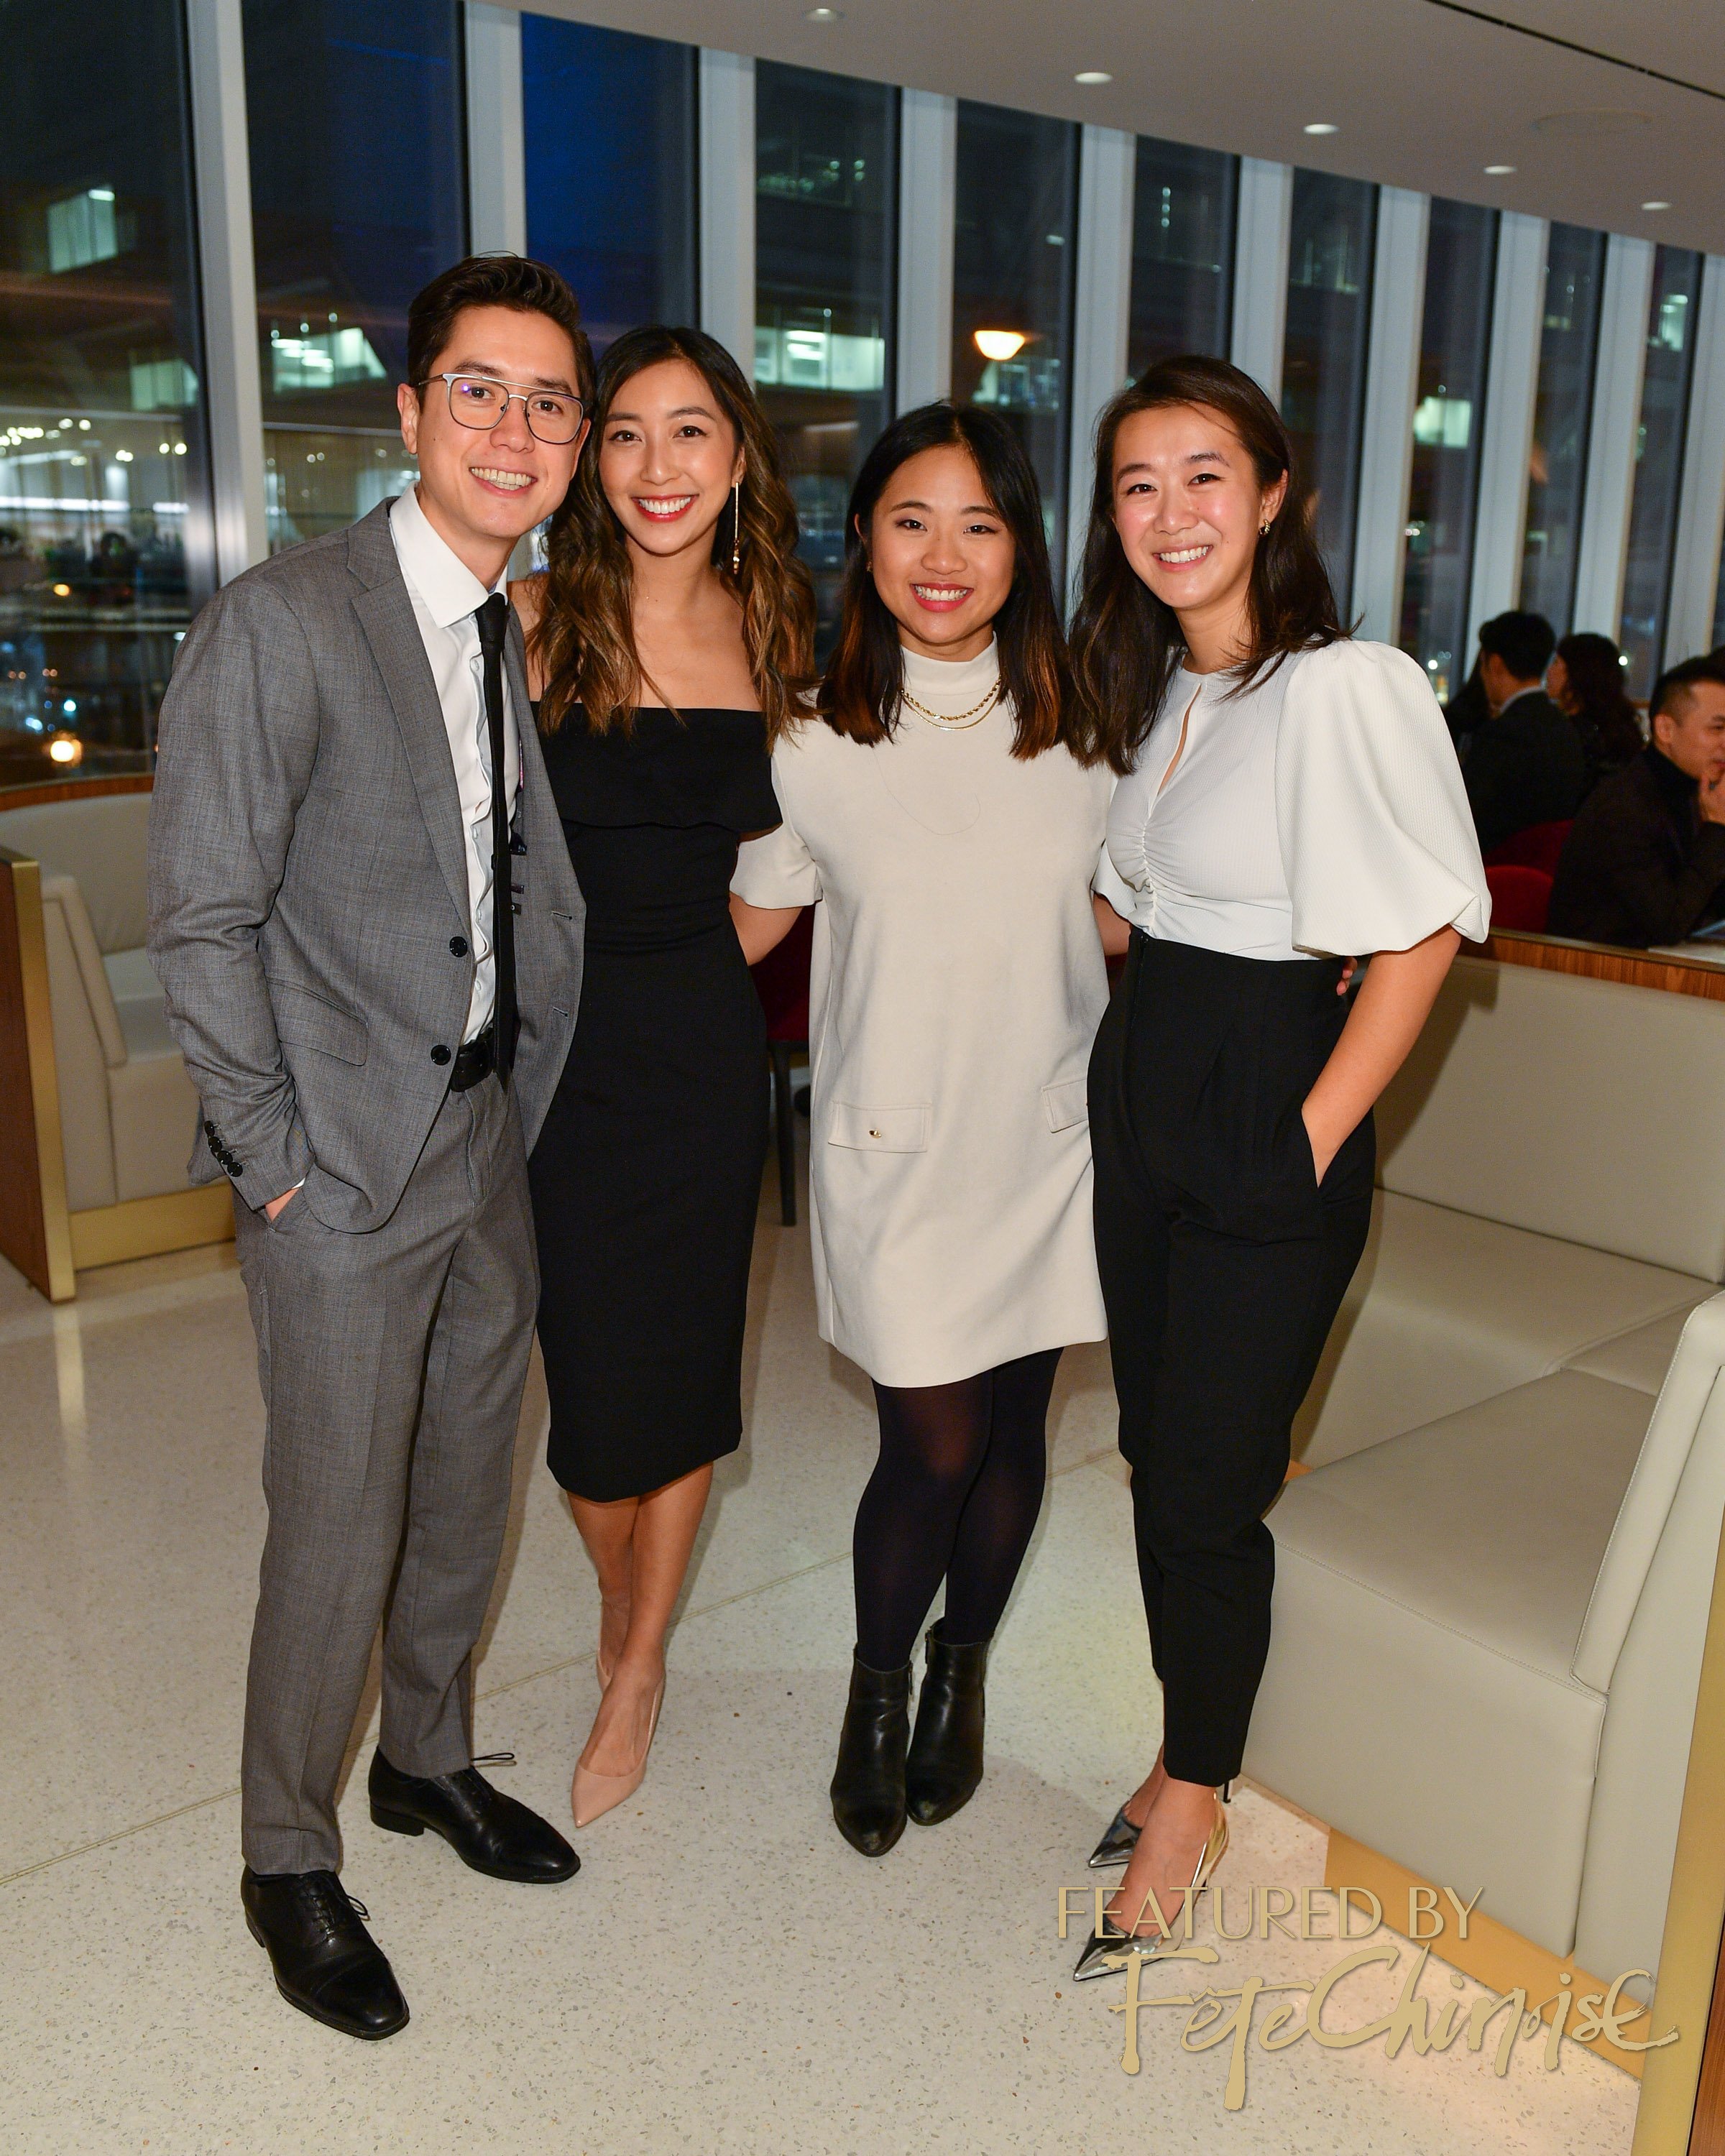 Fete-Chionise-Magaine-edition7-launch-party-holt-renfrew-photography-release-106.jpg